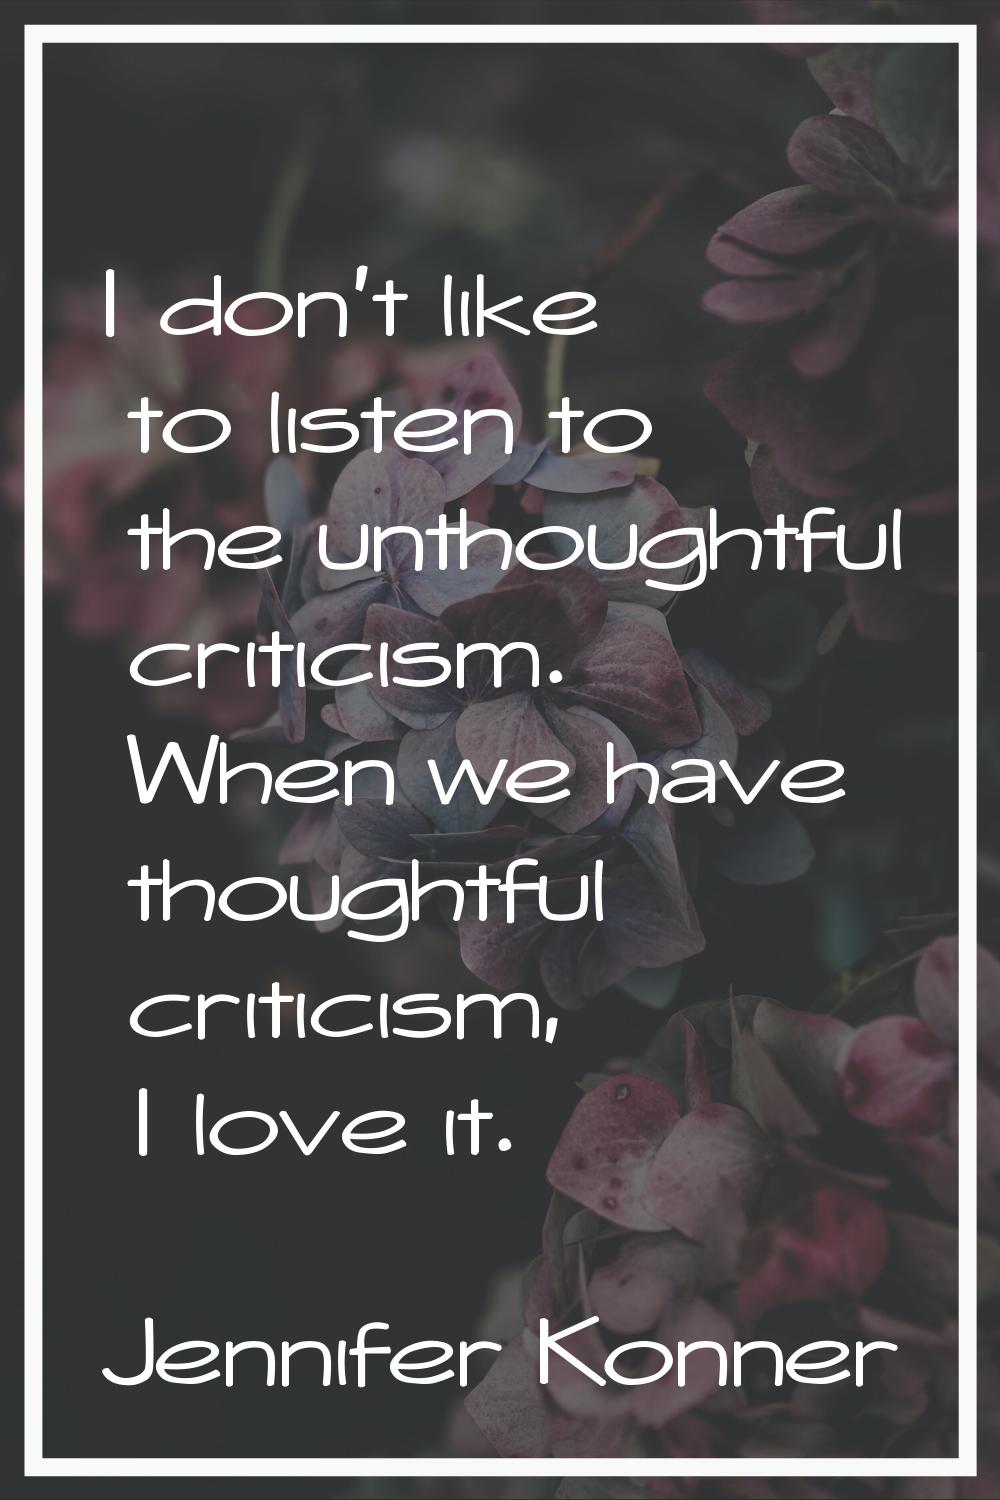 I don't like to listen to the unthoughtful criticism. When we have thoughtful criticism, I love it.